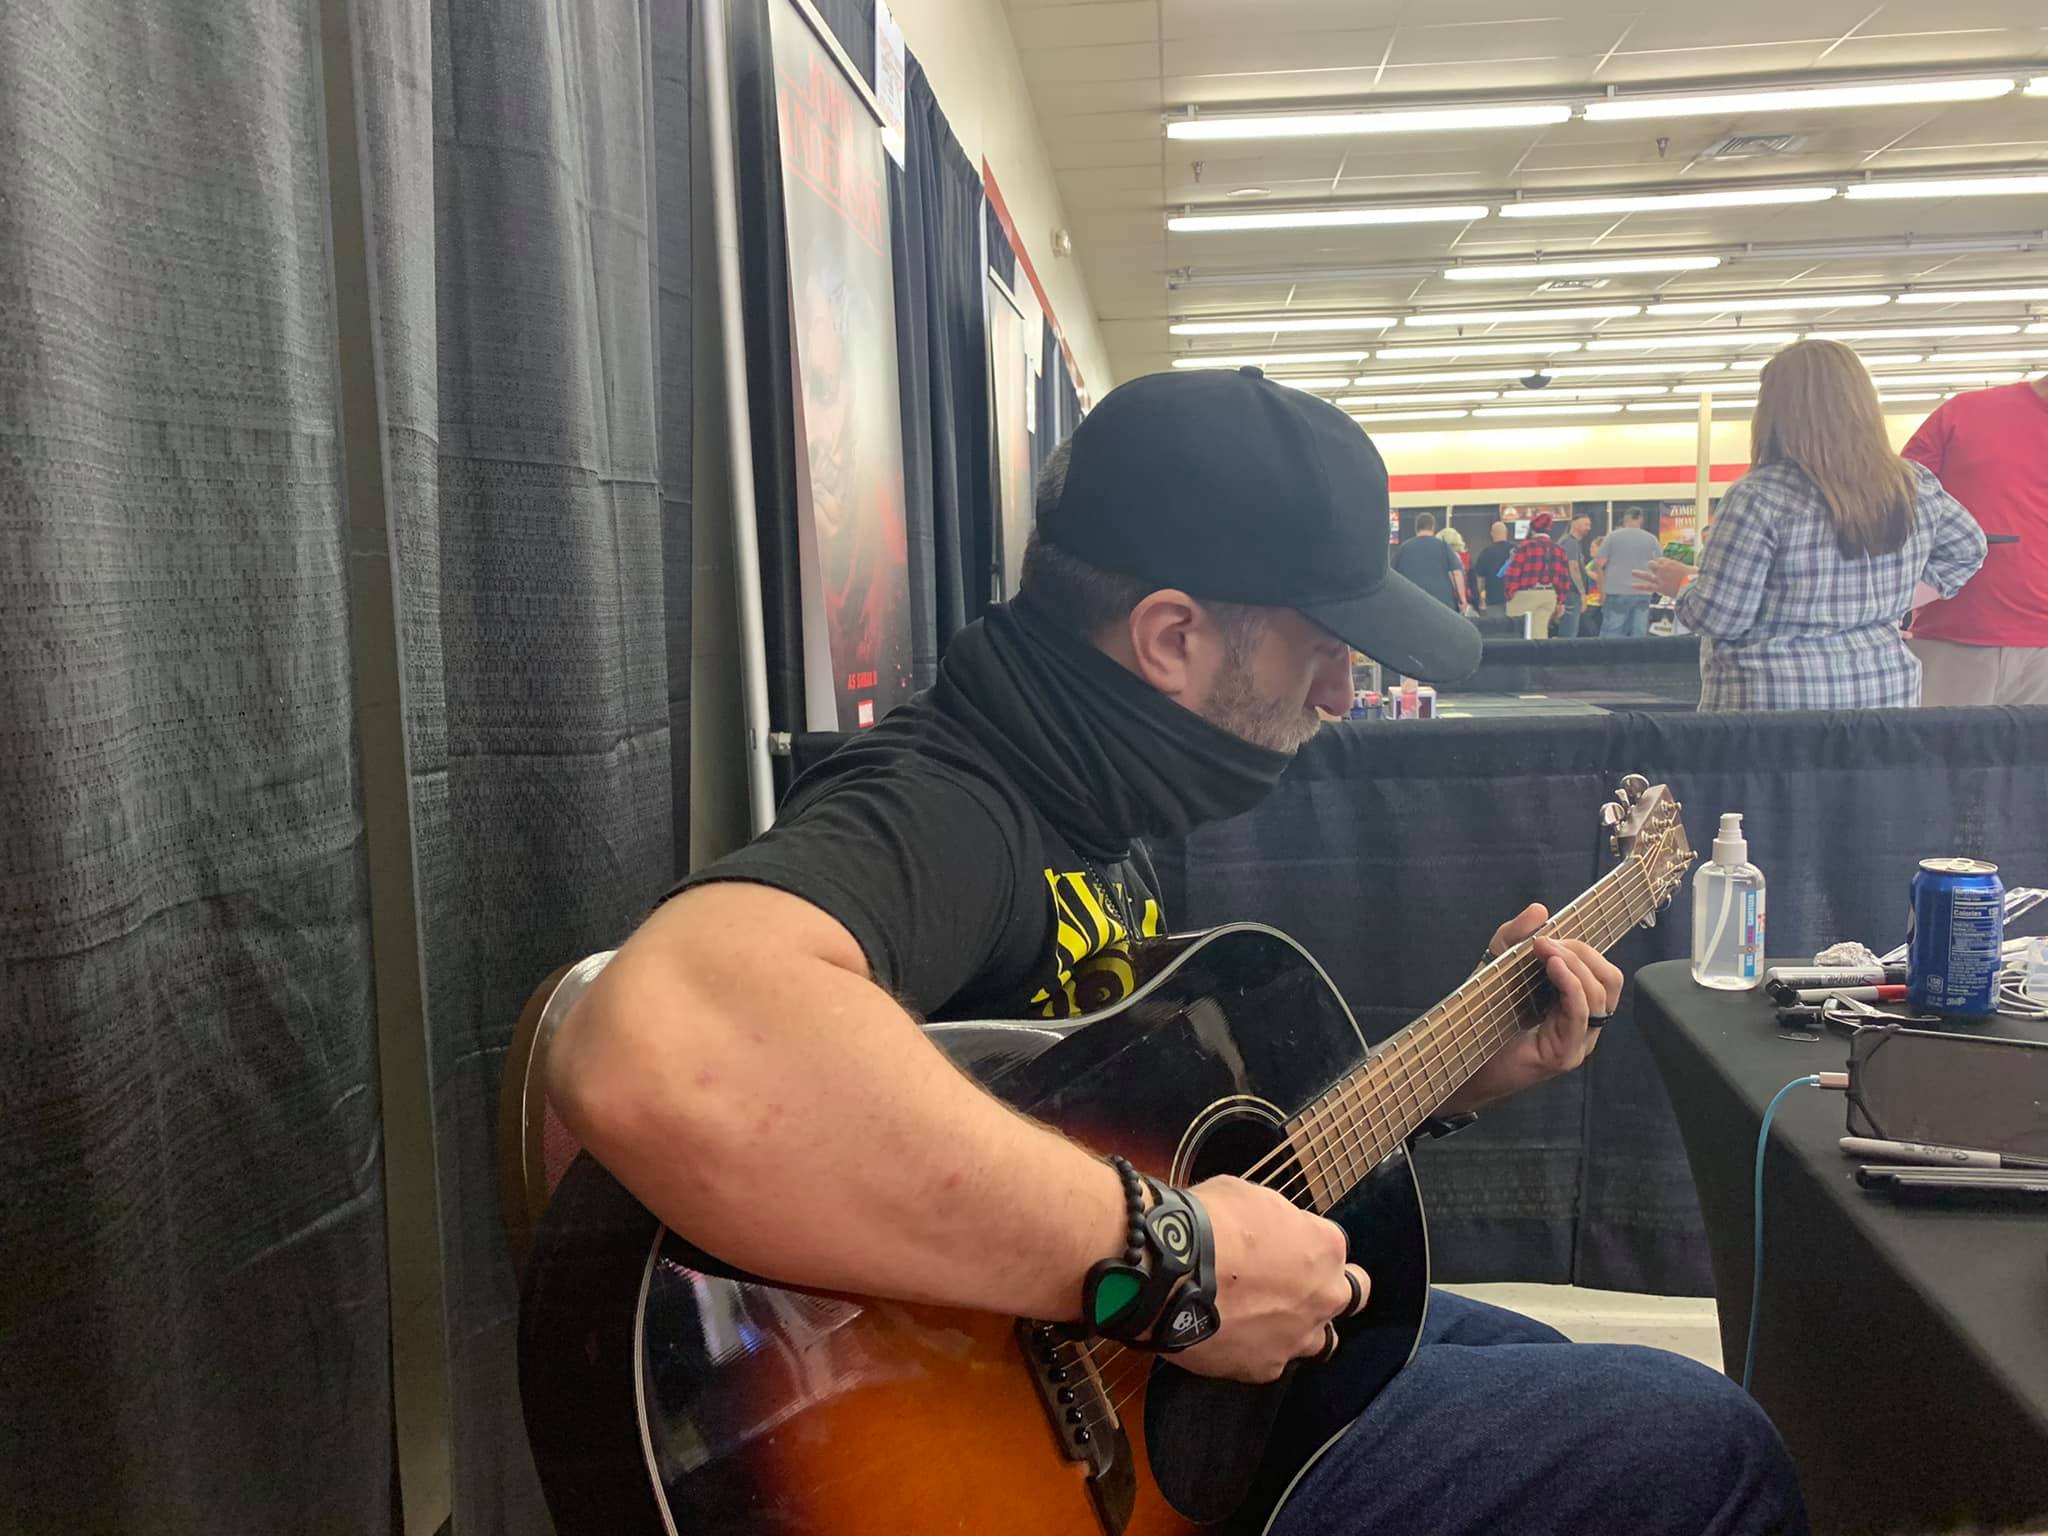 Dustin Diamond having a quiet moment to himself, playing his guitar. October, 2020. | Photo: Facebook/dustindiamond.